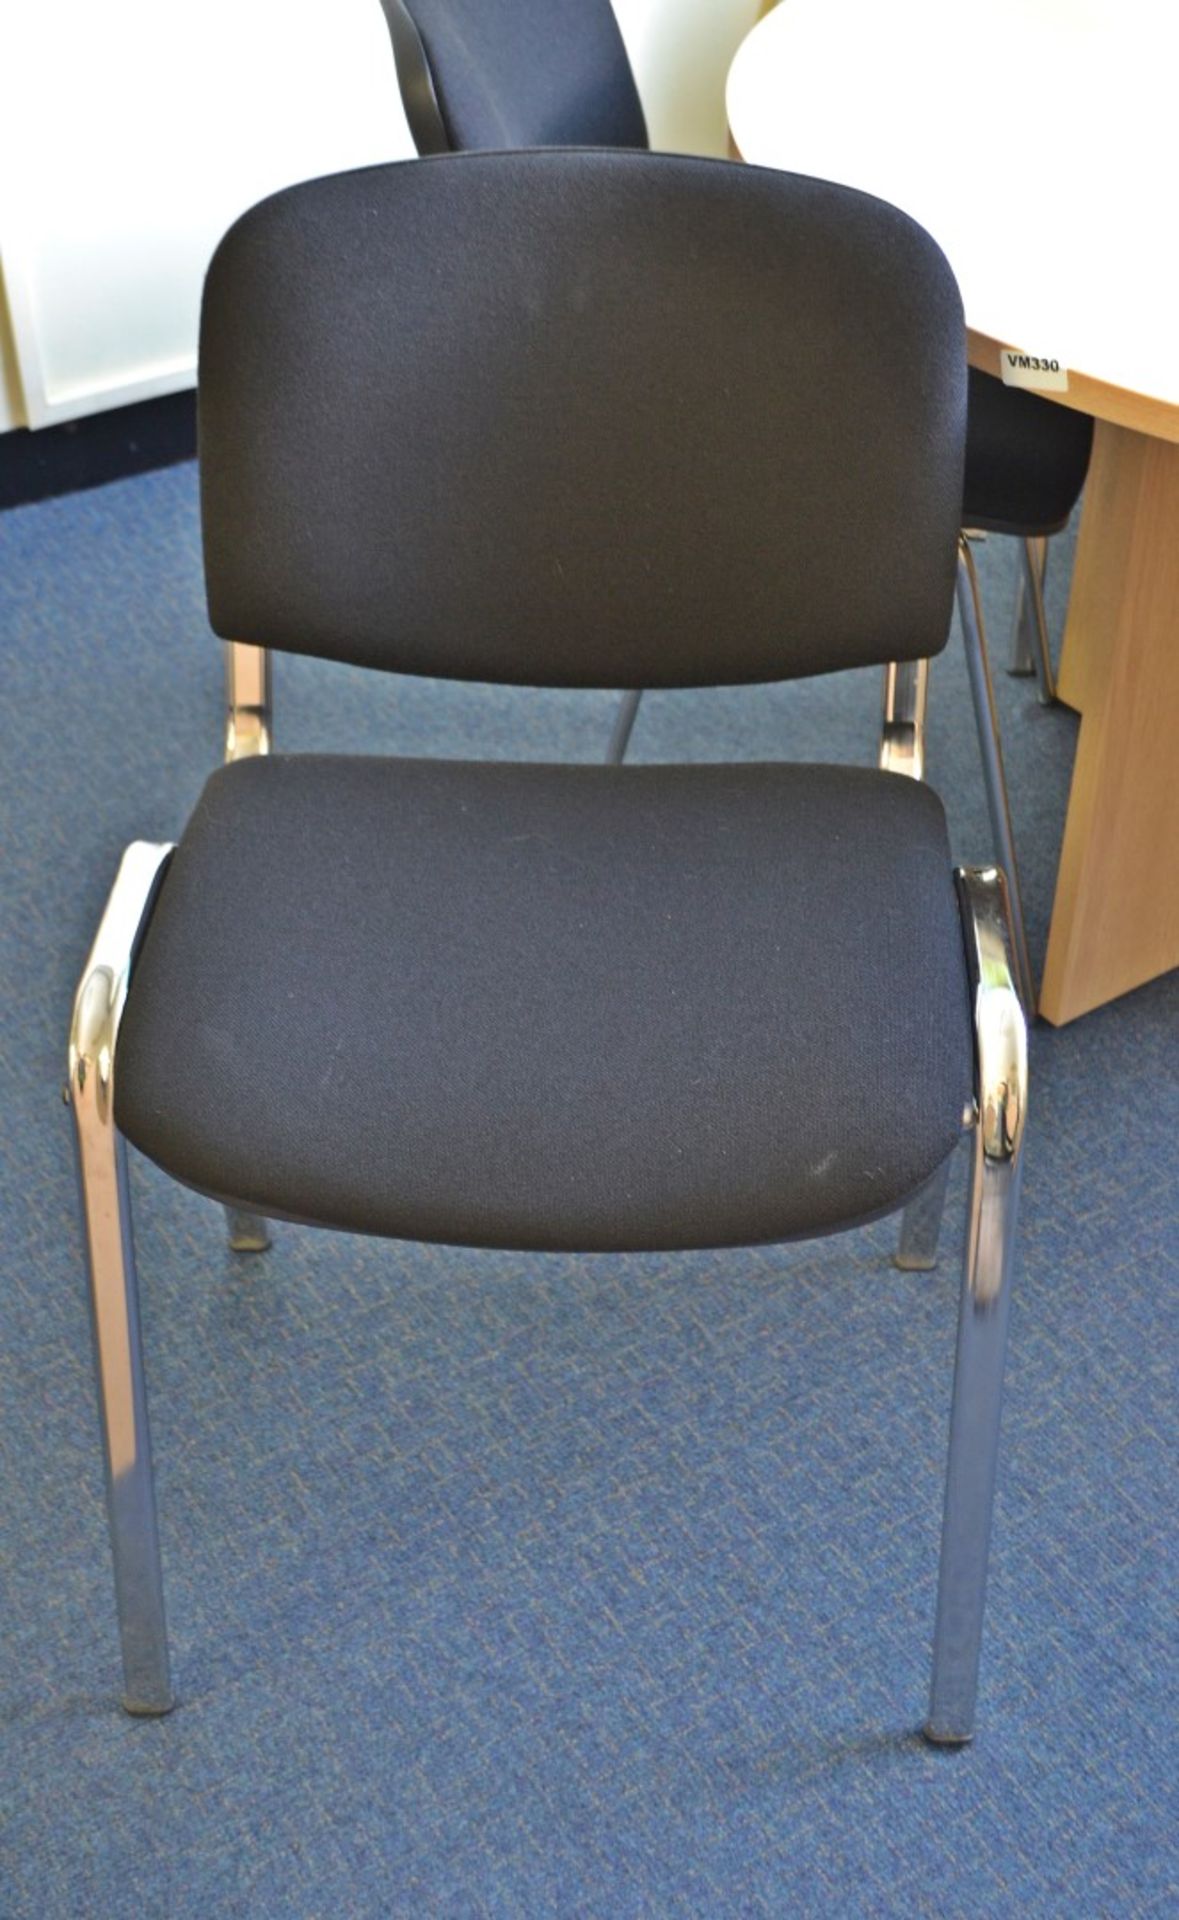 1 x Round Office Meeting Table With 4 Black Chairs - Ref: VM330 - CL409 - Location: Wakefield WF16 - Bild 2 aus 2